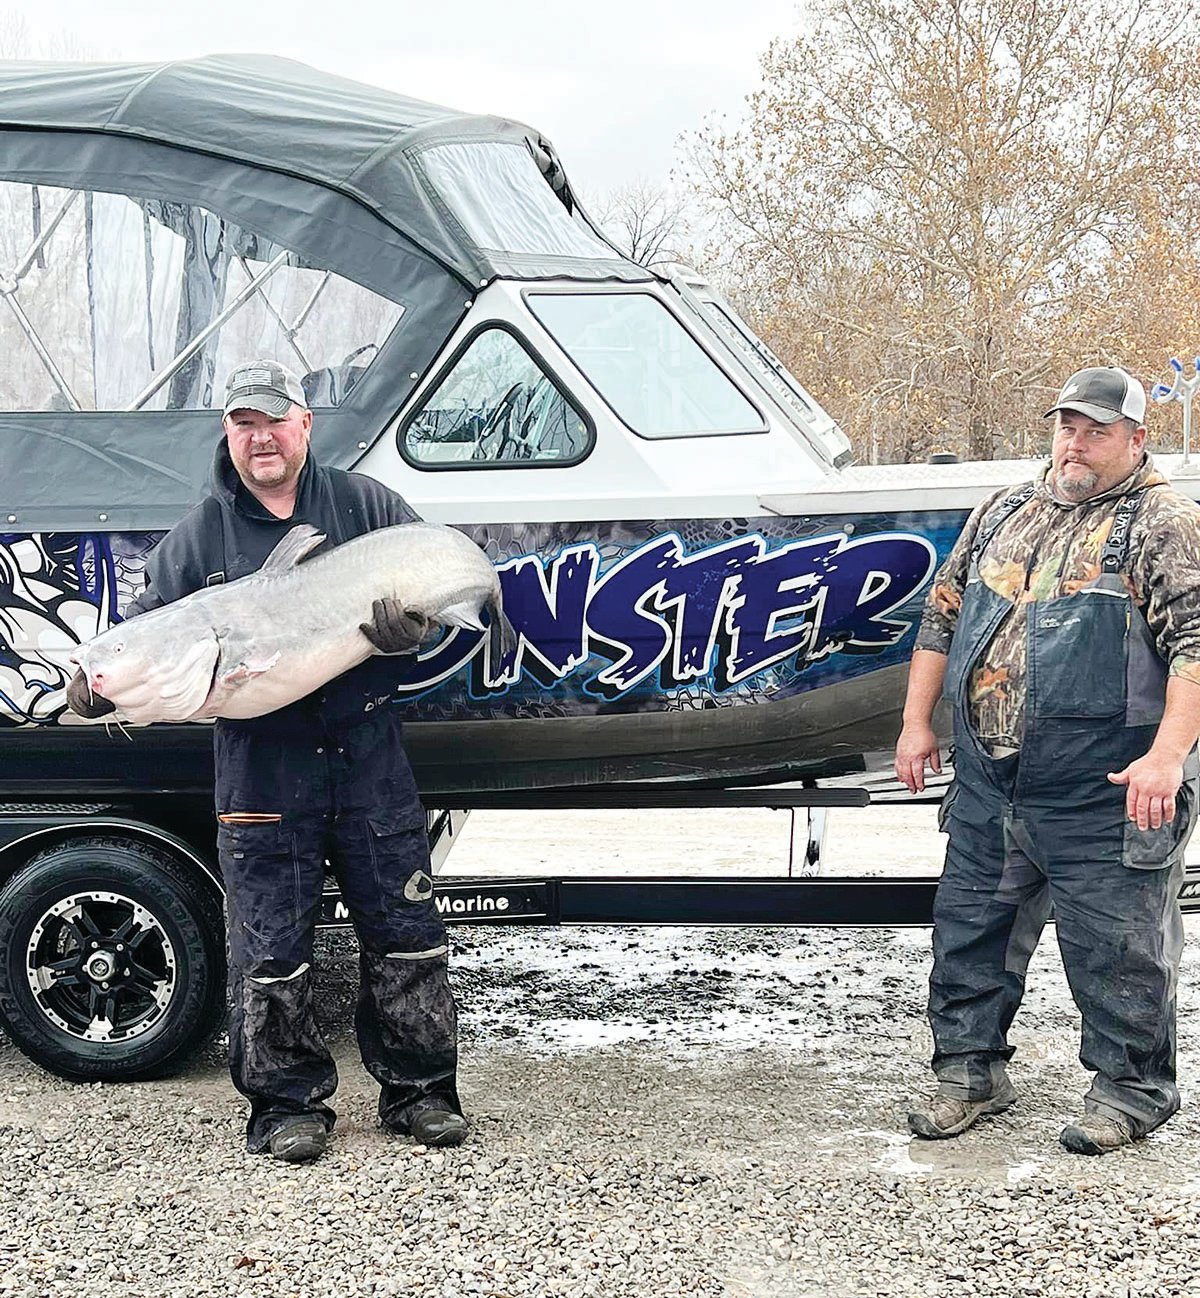 Jon Young and Dave Swearingin earned the honor of catching the biggest catfish on the day (63.9 pounds). 